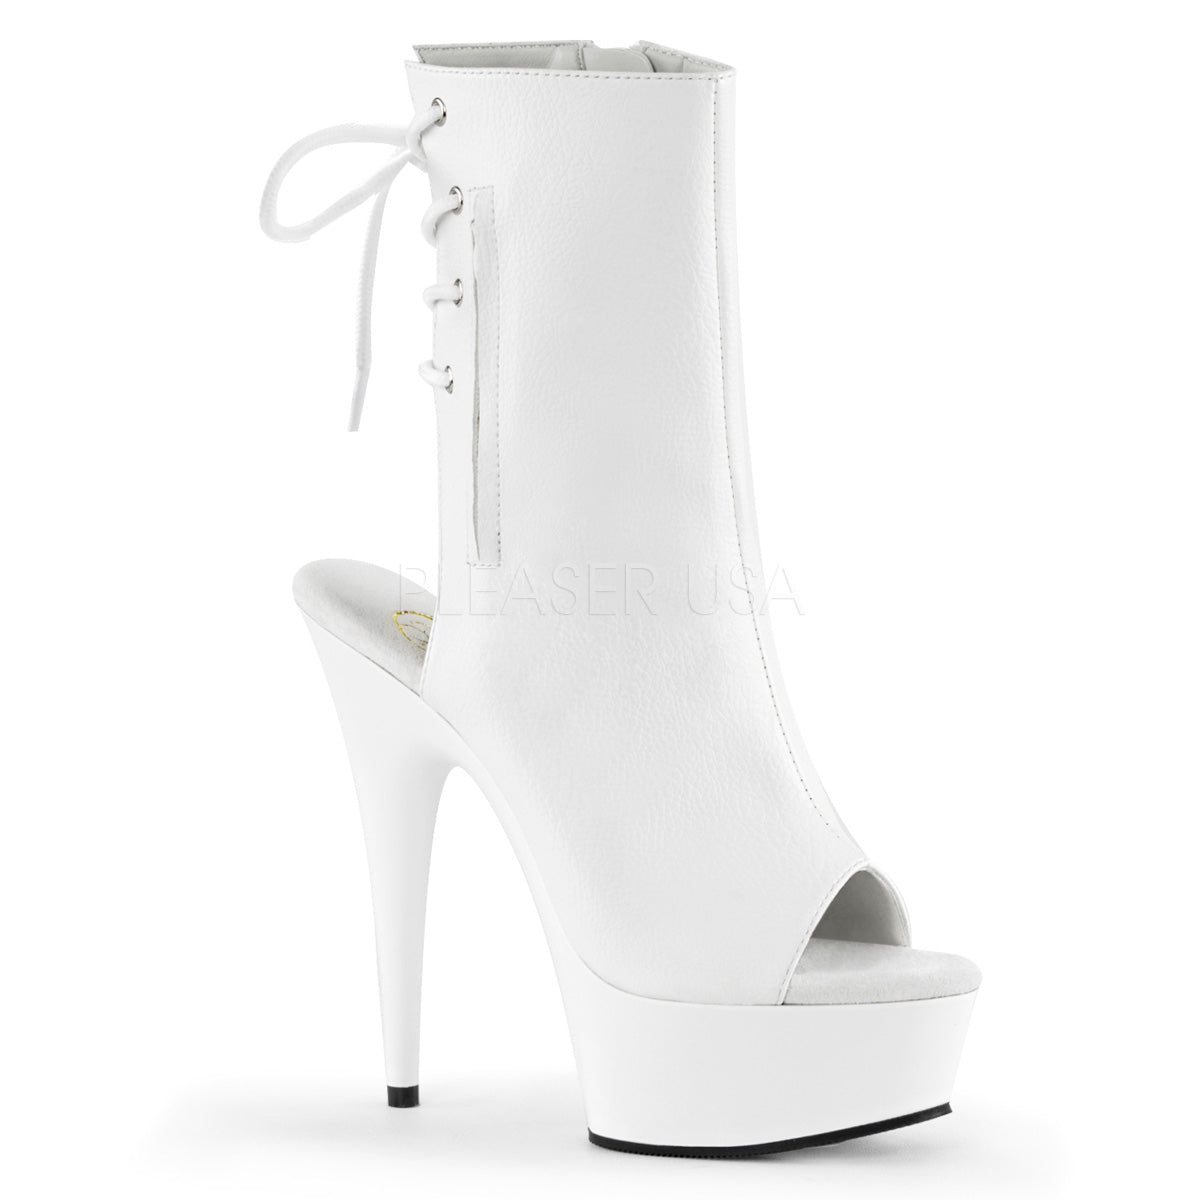 Pleaser Delight 1018 White - Model Express VancouverBoots